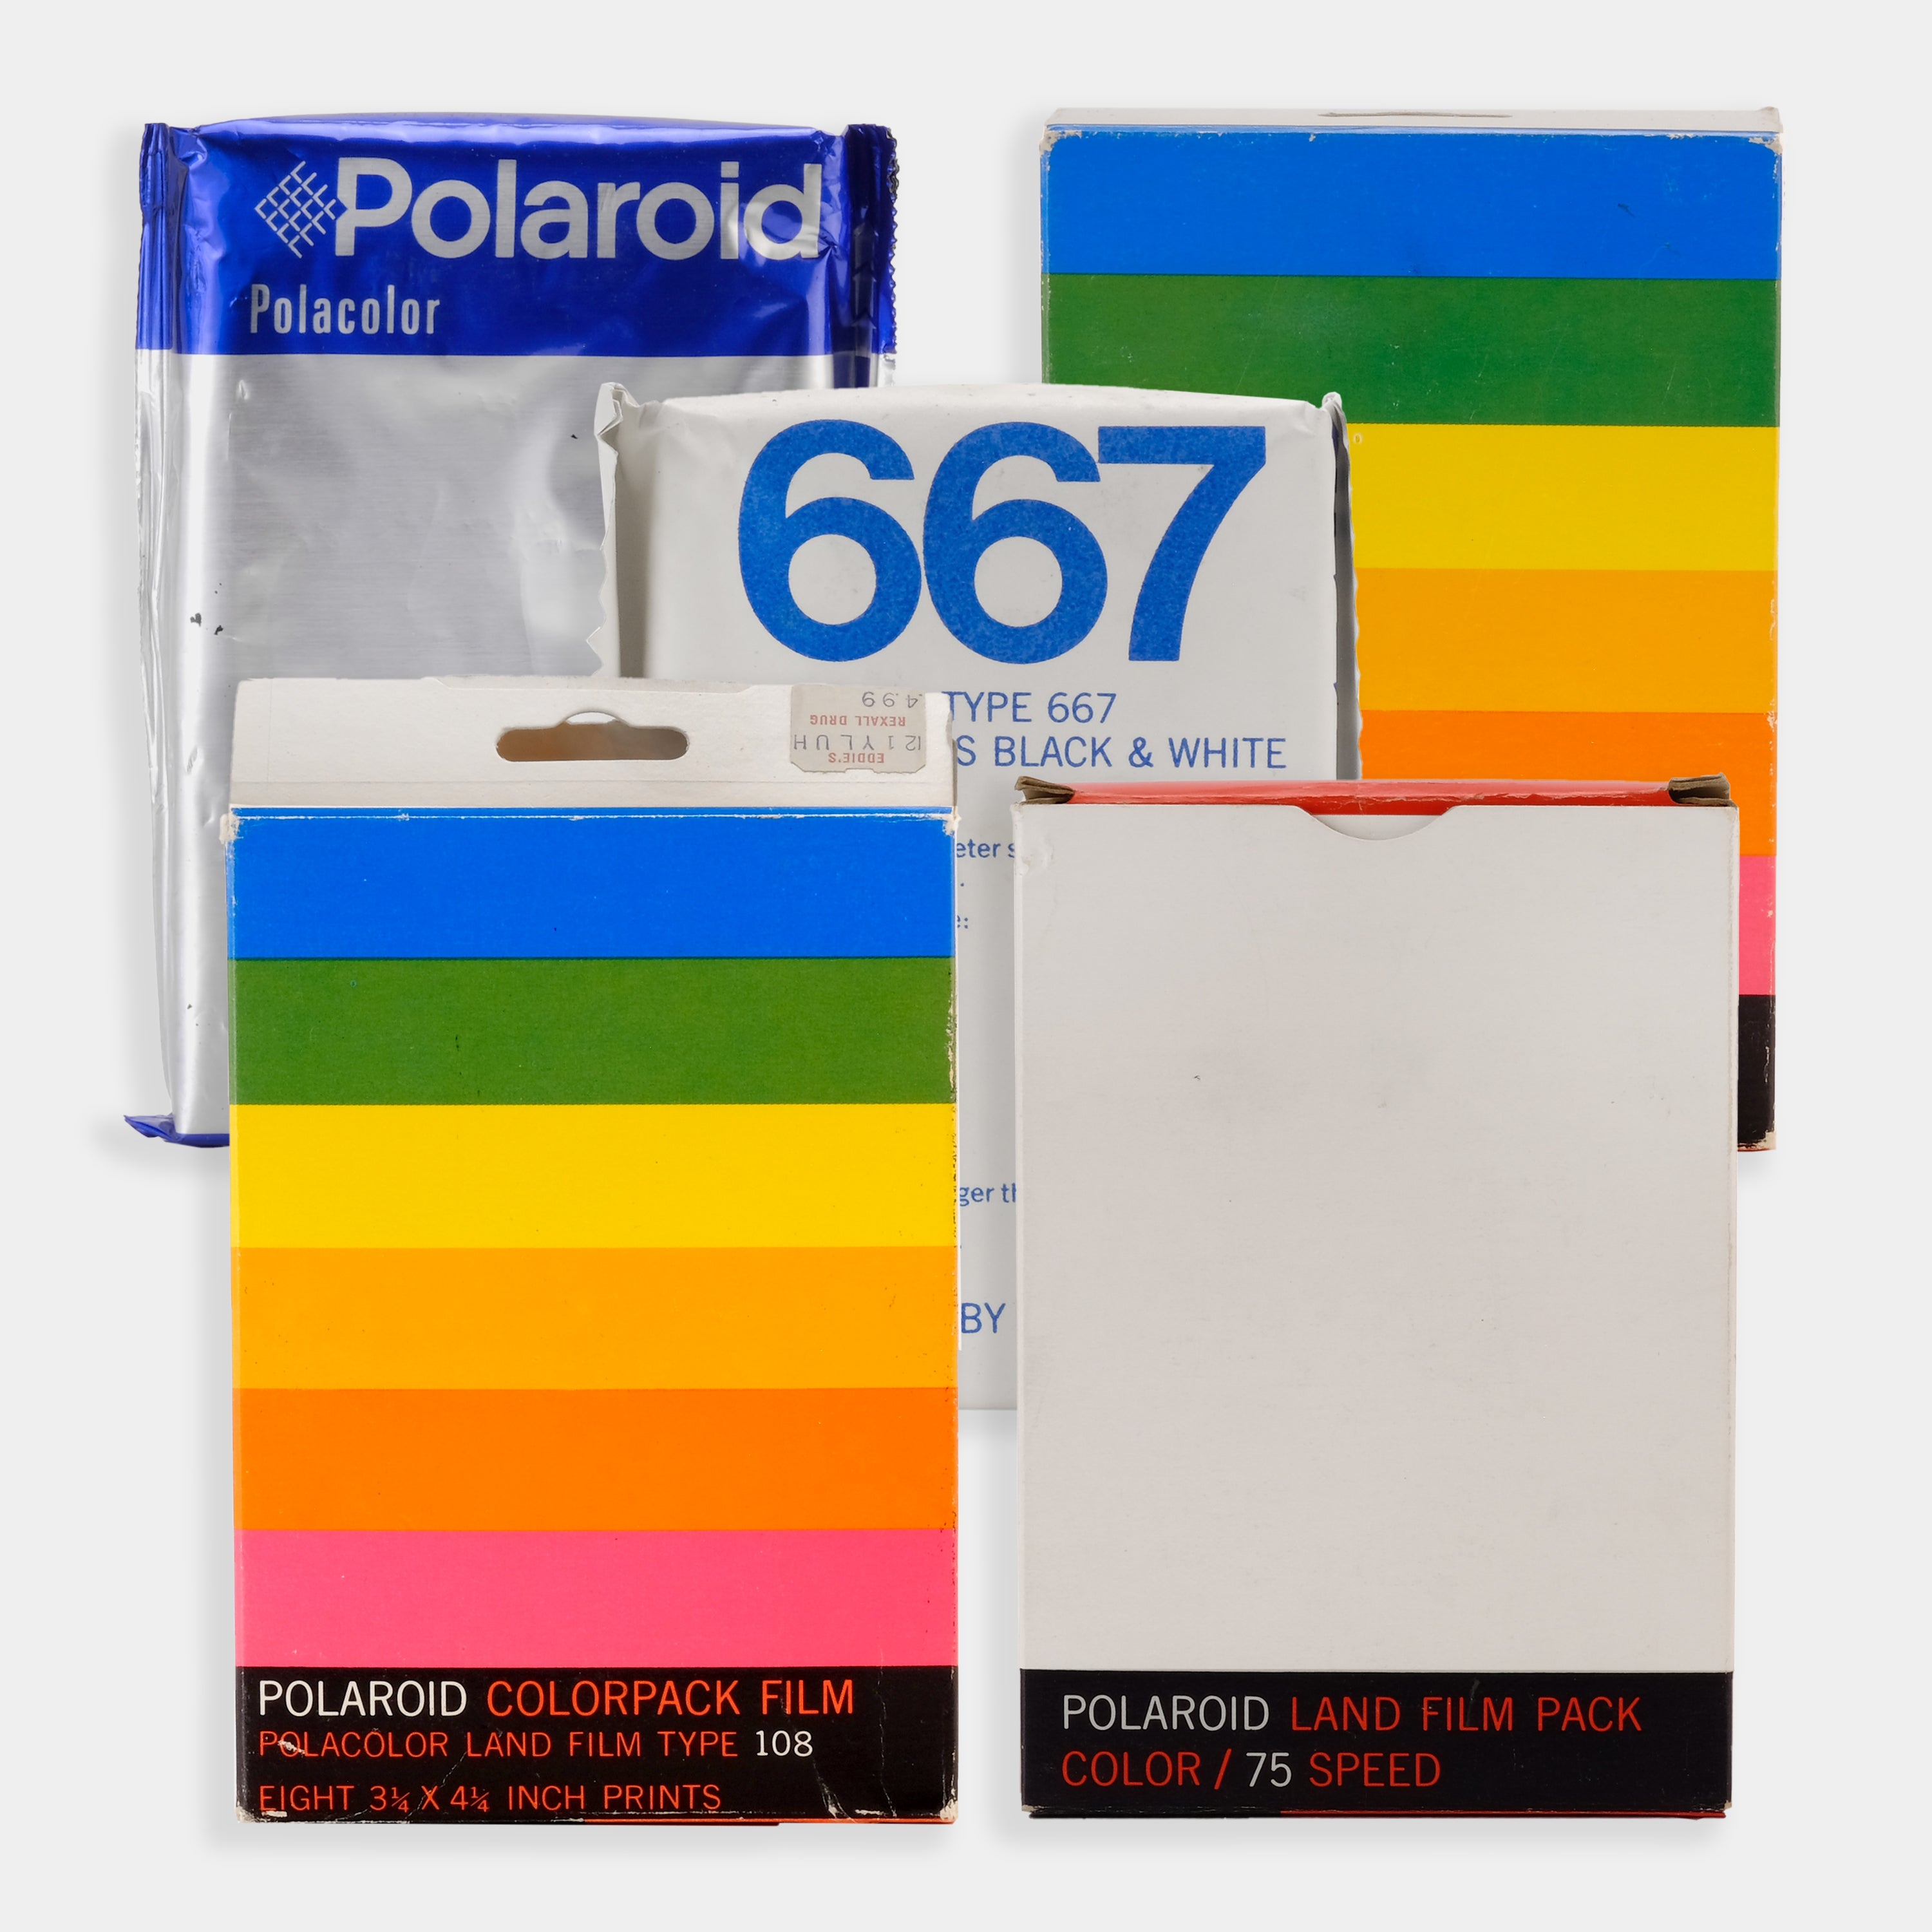 Lot of 5 Miscellaneous Expired Polaroid Packfilm Type 100 Film Packs